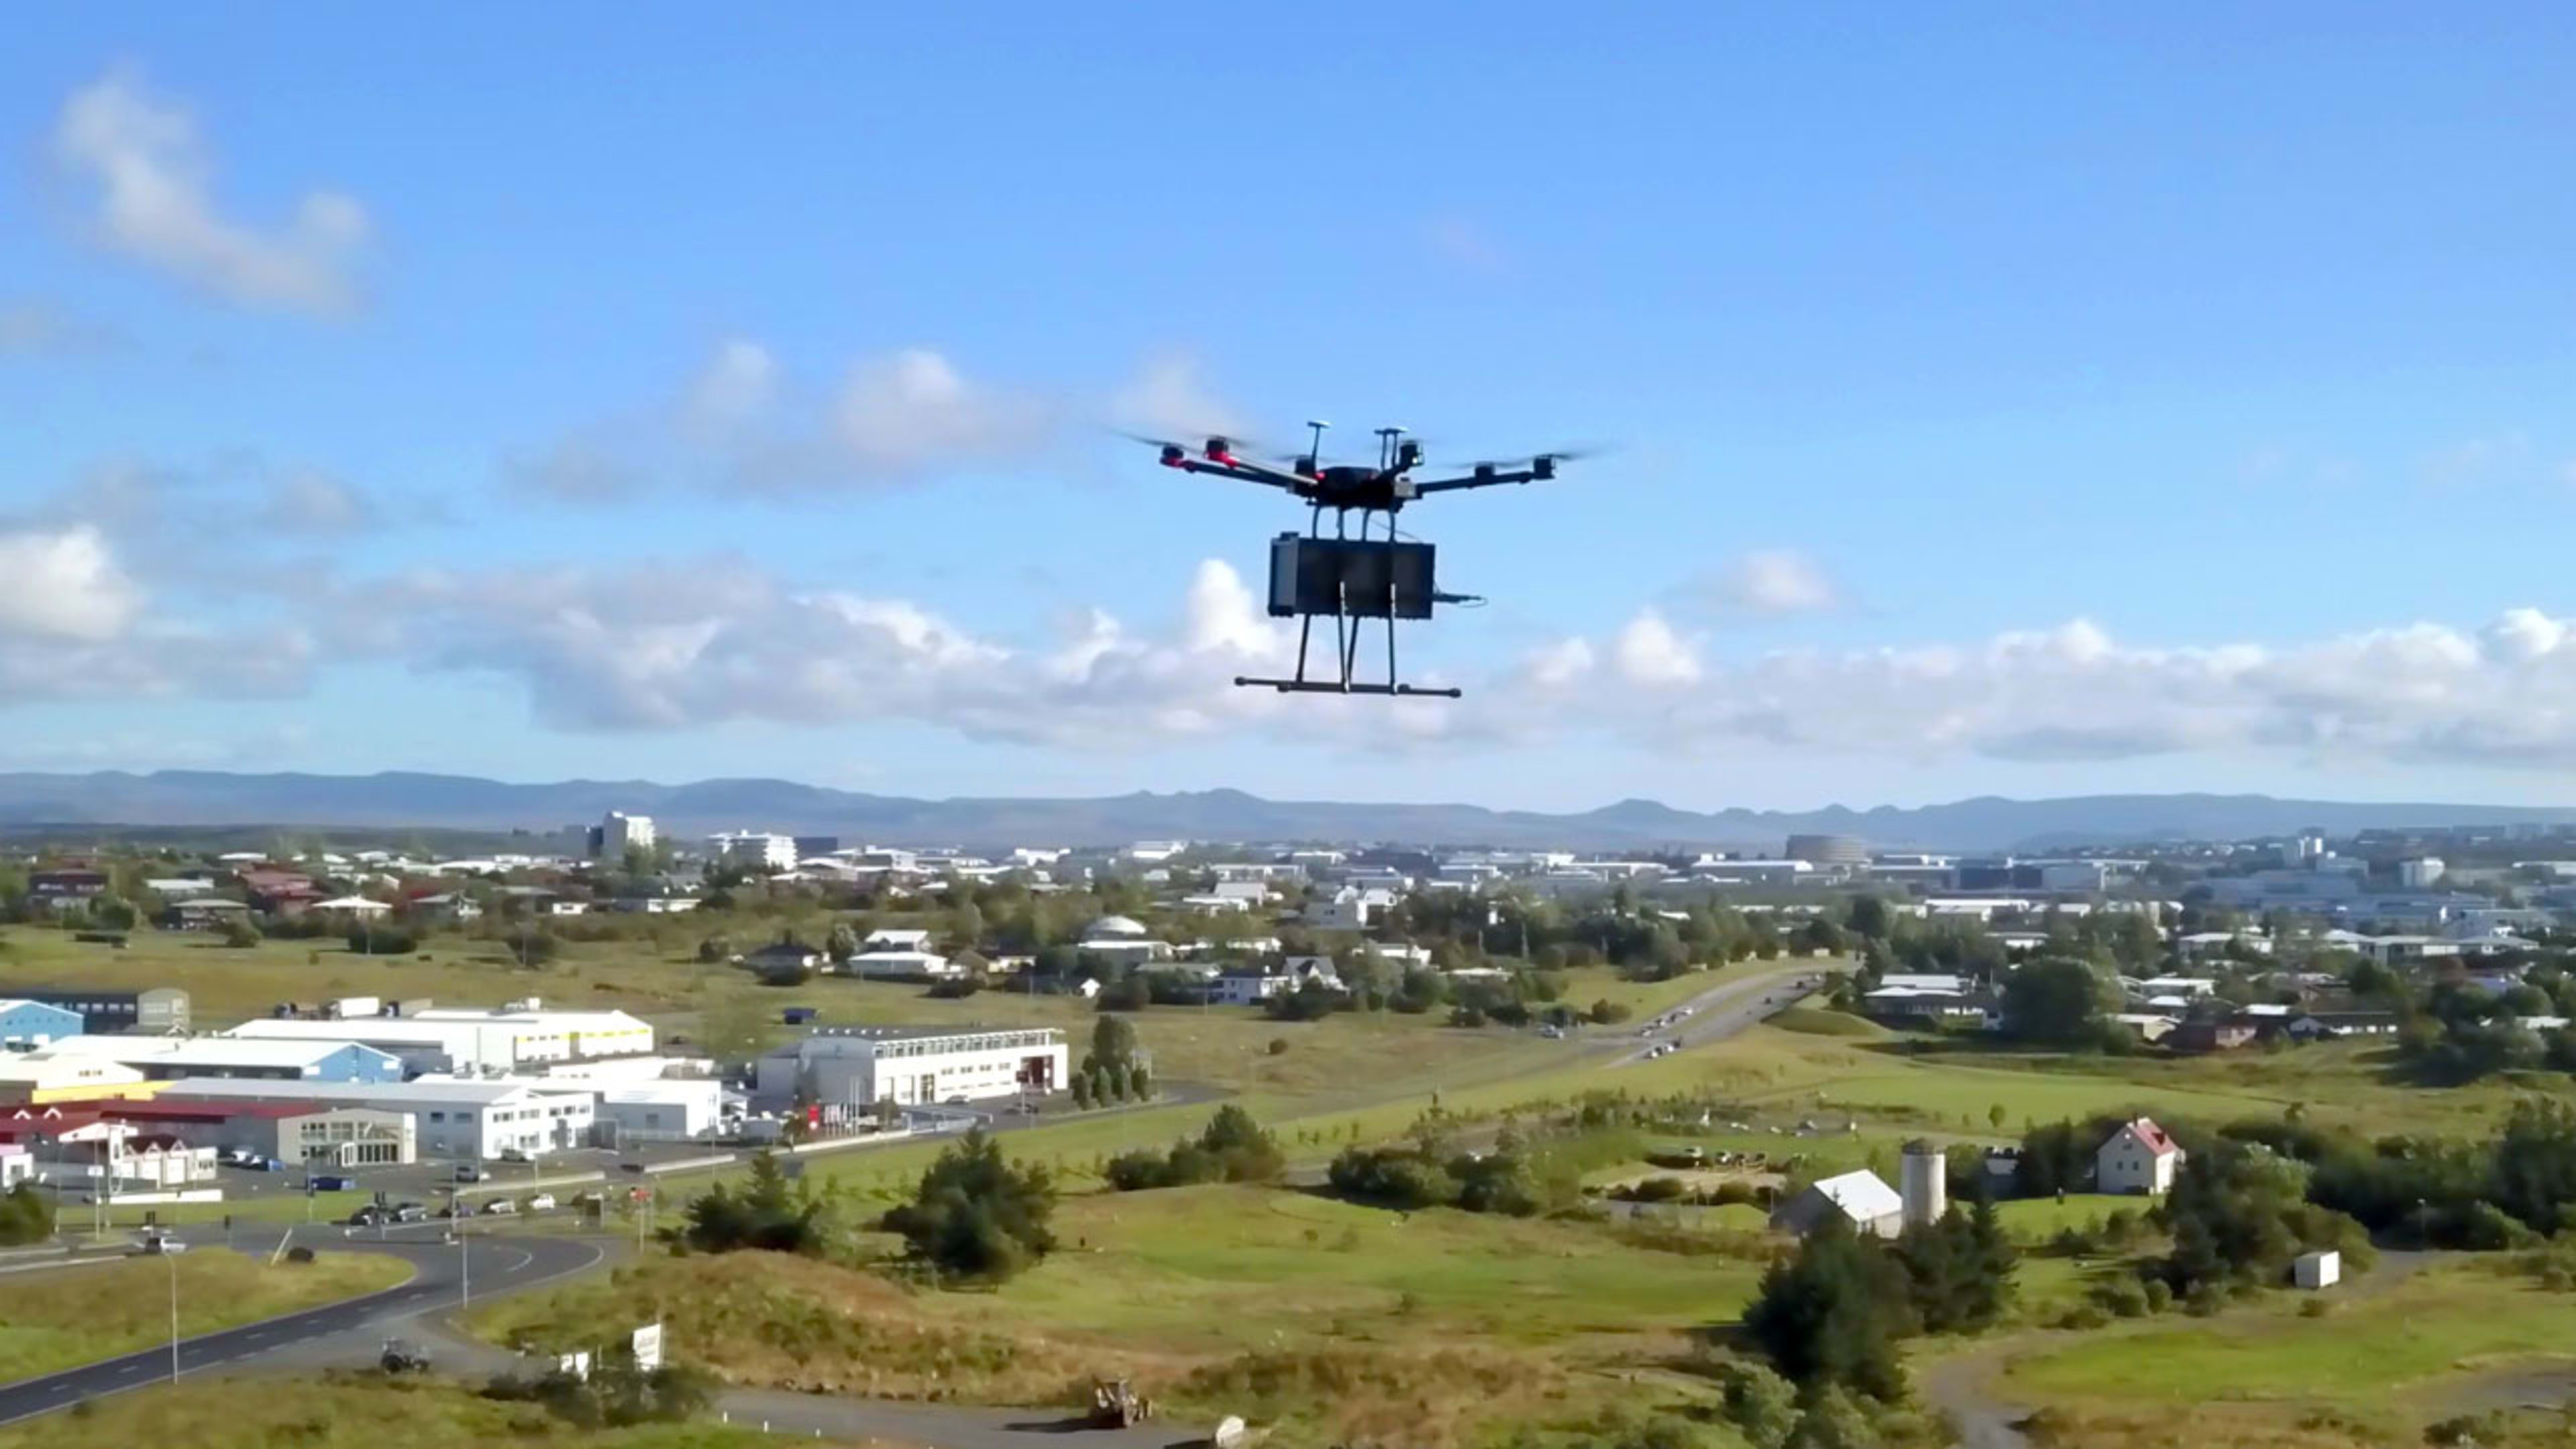 Flying food comes to Iceland with a fully operational drone delivery system